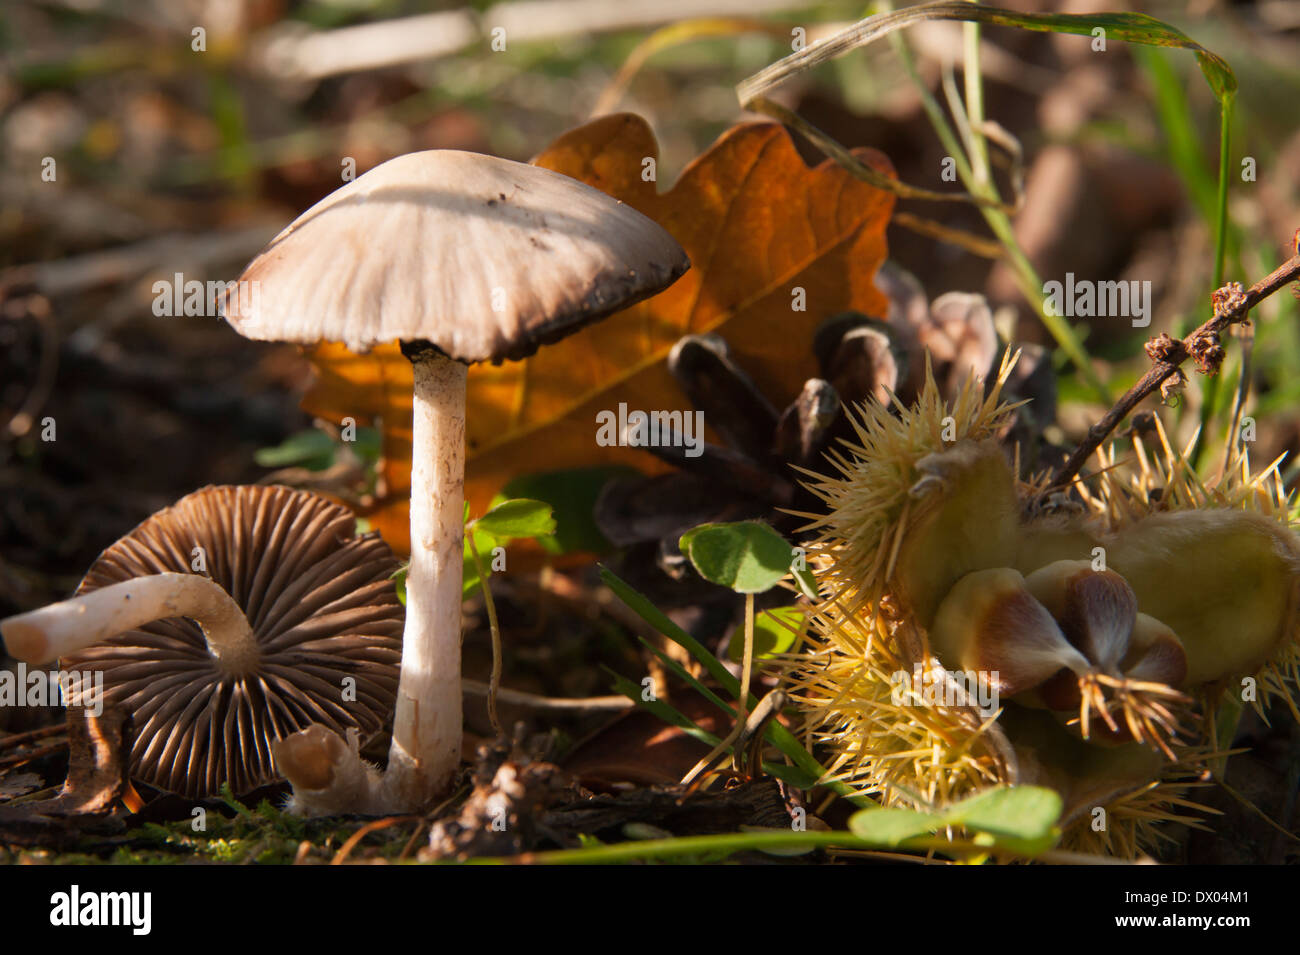 Autumnal arrangement of mushrooms, oak leaf, pine cone and sweet chestnut in Eskdale, Lake district, England Stock Photo